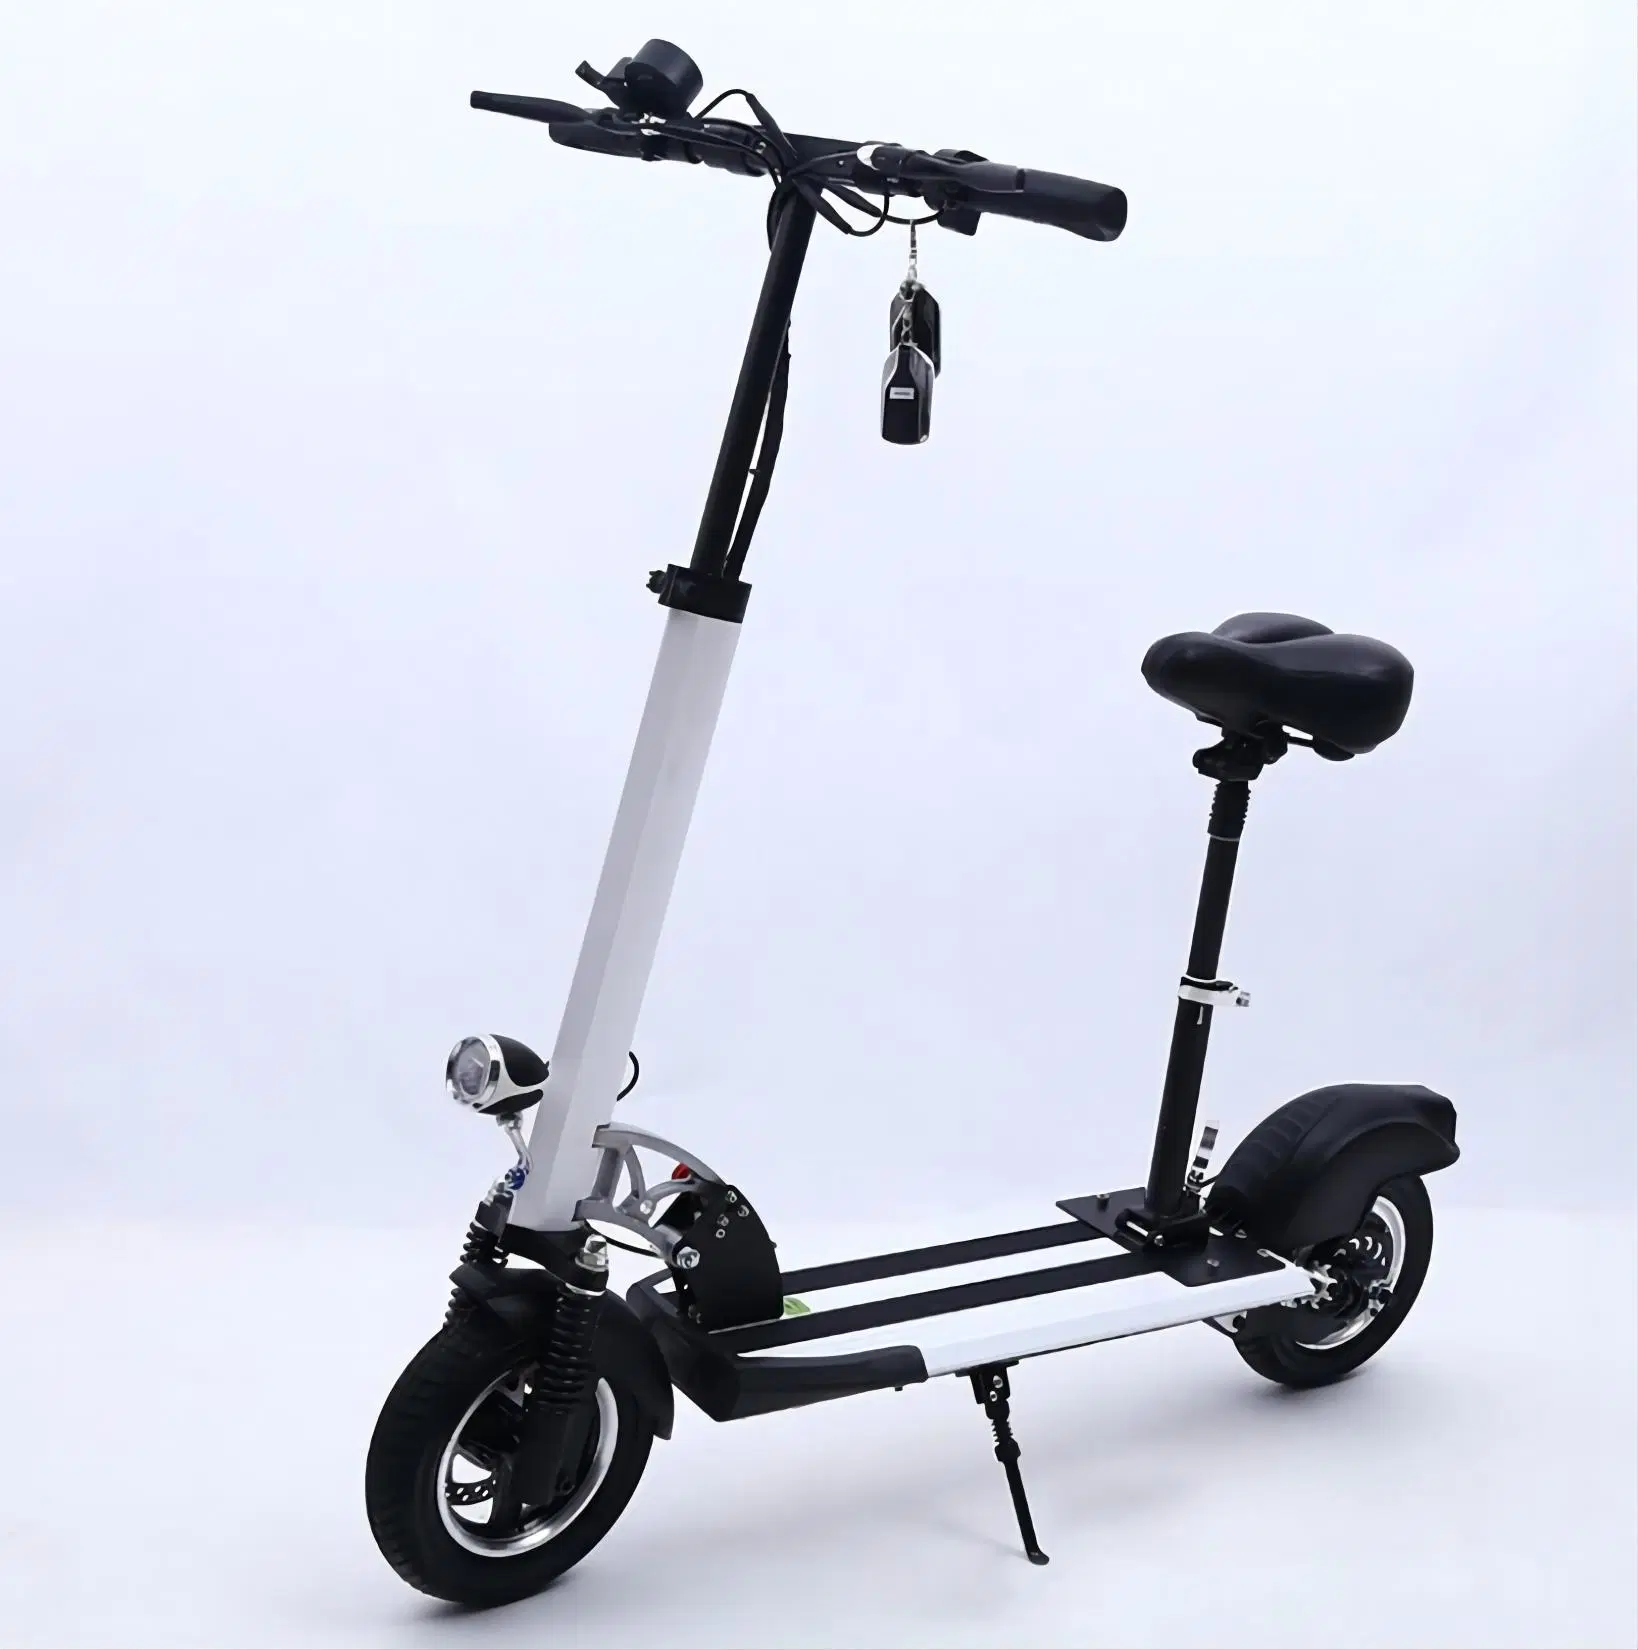 New-Modern-LED Lights-Li-ion Battery/Electric-Vehicle/Bike/Bicycle/Scooters-Commuters/Sports-City-E-Scooters